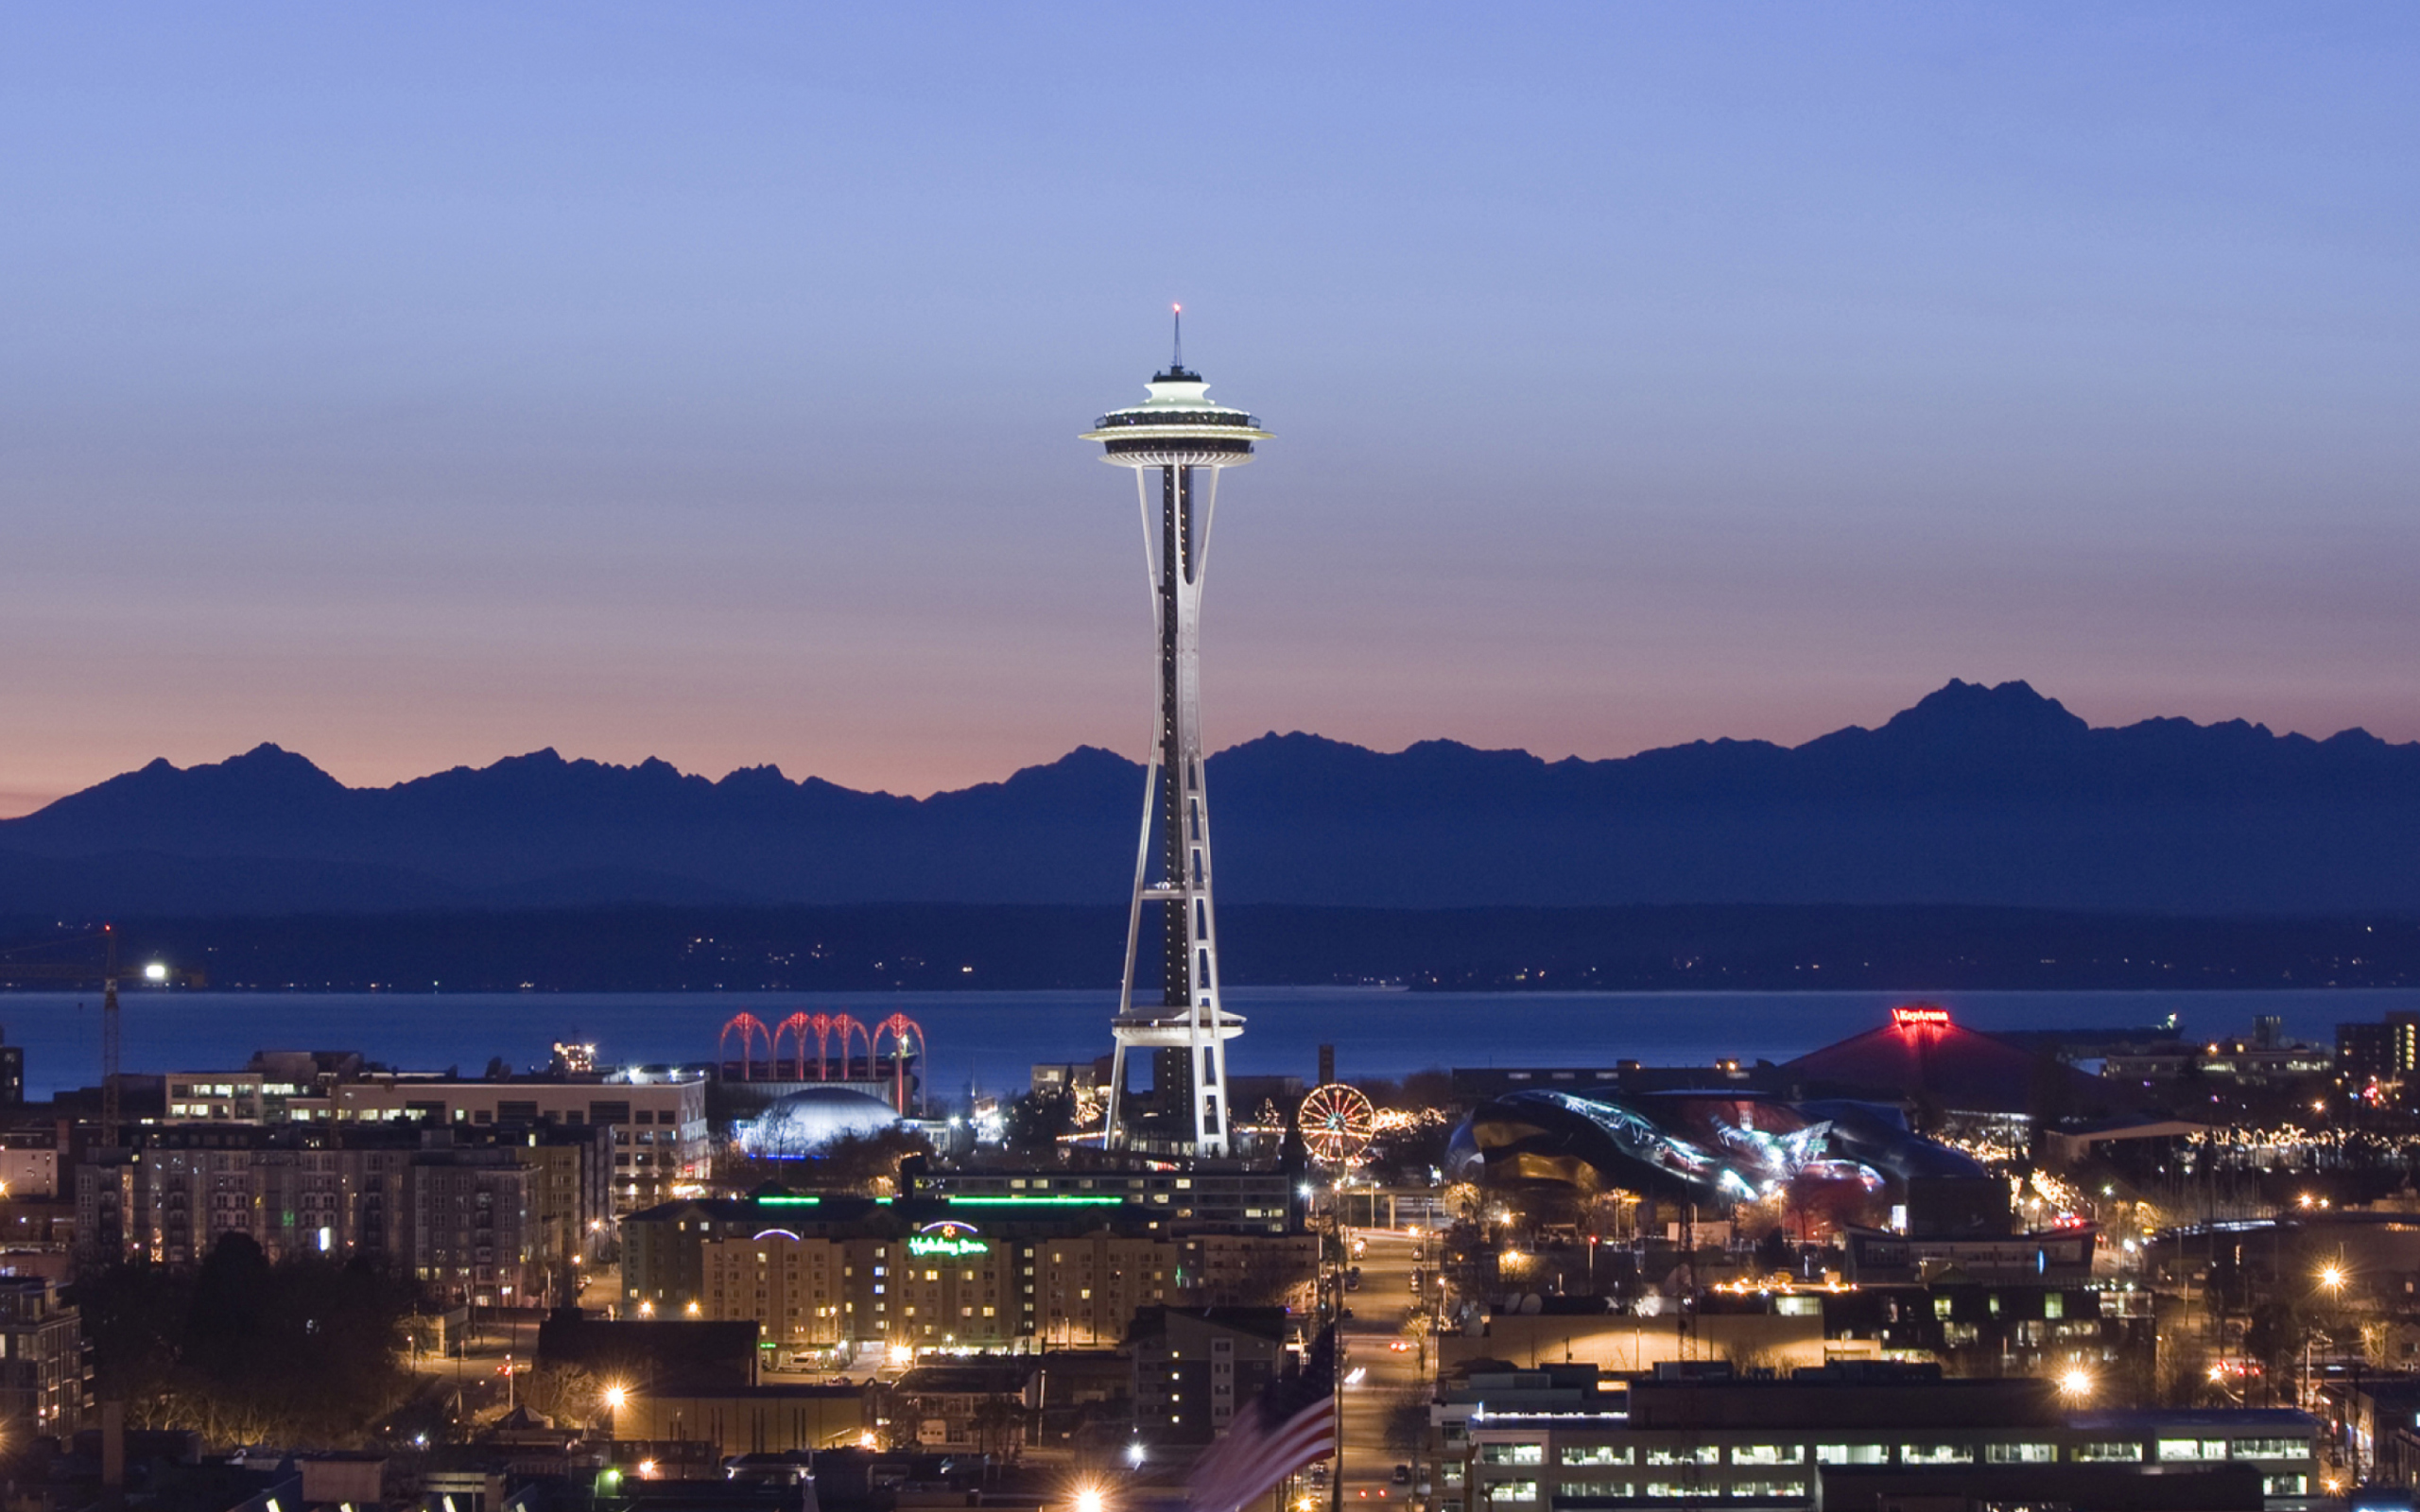 Das Space Needle and Seattle Center Wallpaper 2560x1600